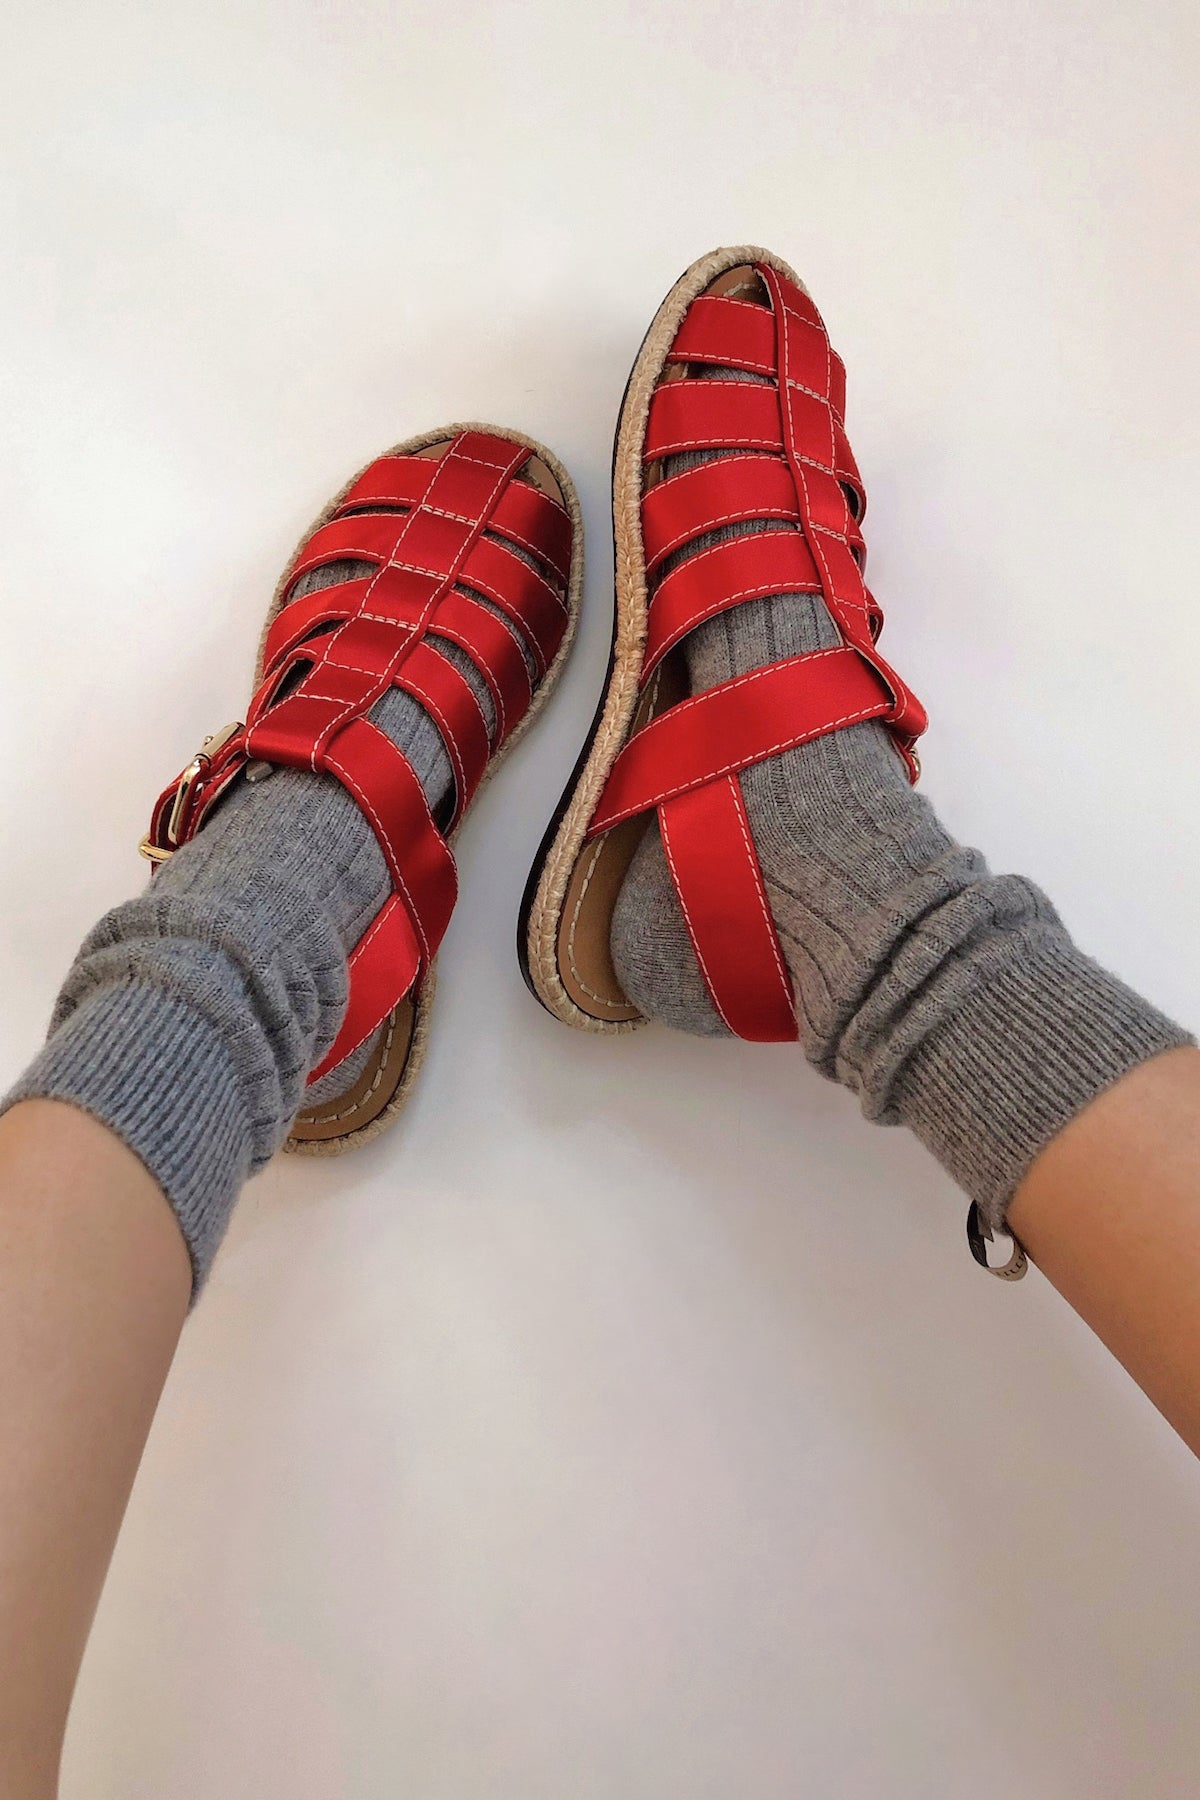 The Danielle Sock, Mongolian Cashmere, Heather Grey with red fisherman sandals